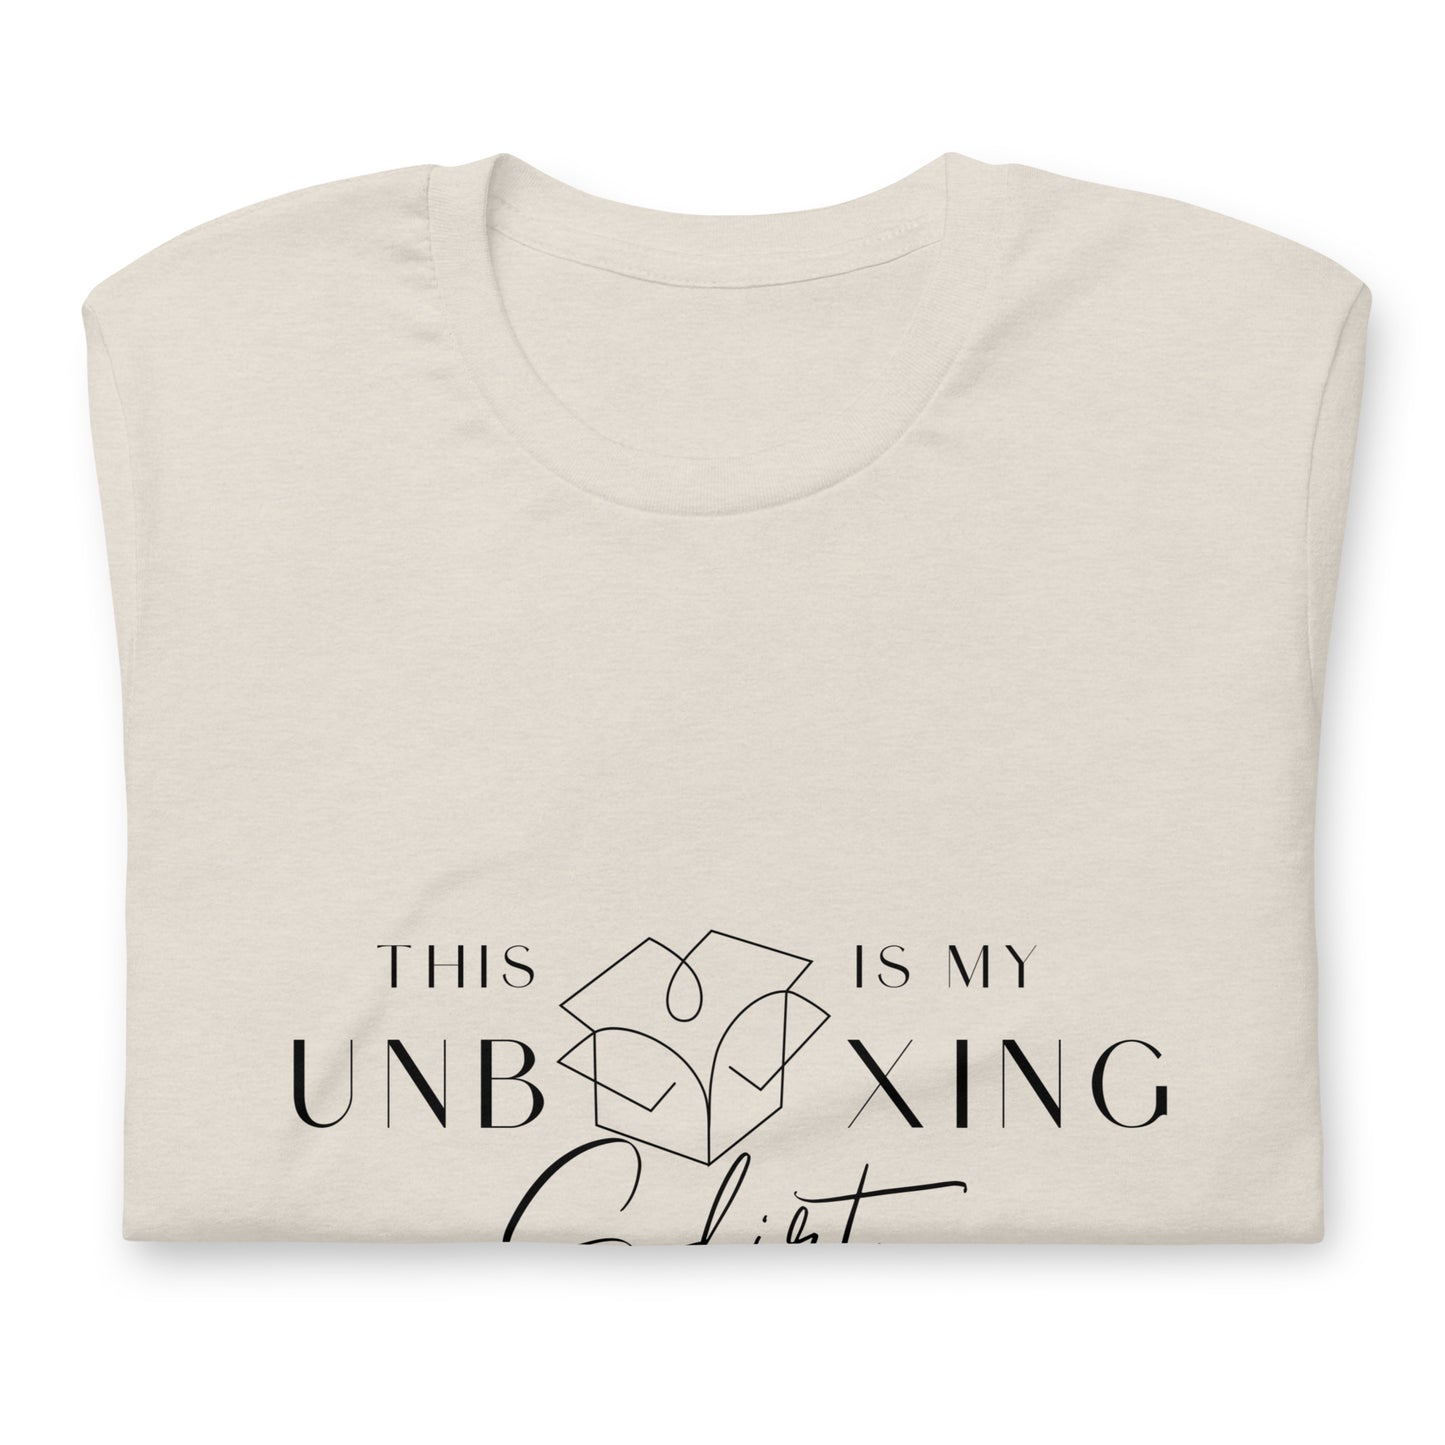 This Is My Unboxing Shirt- WHW Original